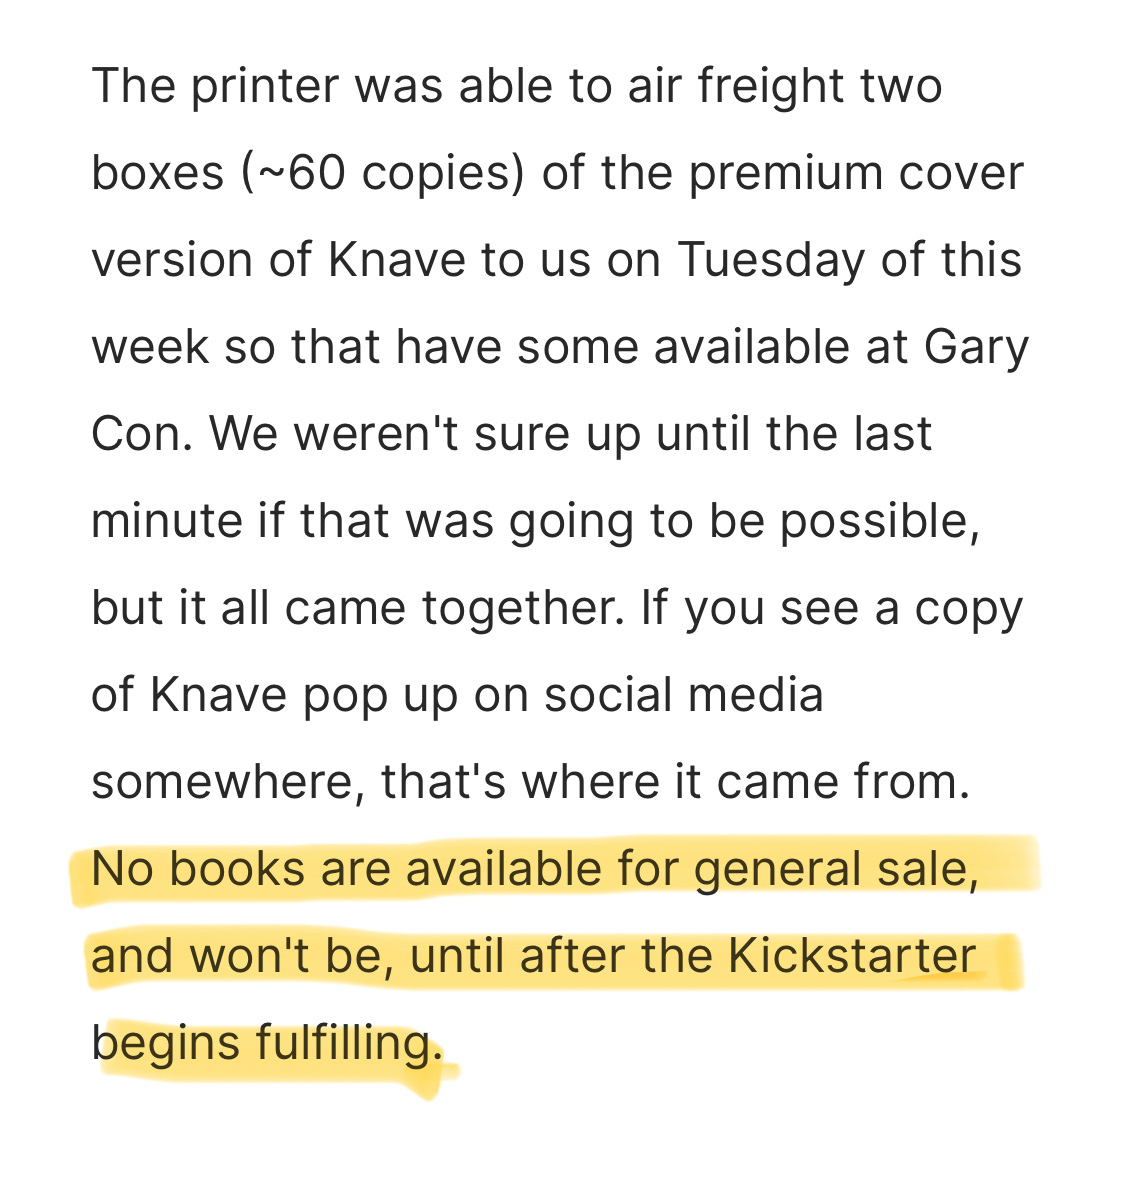 The printer was able to air freight two boxes (~60 copies) of the premium cover version of Knave to us on Tuesday of this week so that have some available at Gary Con. We weren't sure up until the last minute if that was going to be possible, but it all came together. If you see a copy of Knave pop up on social media somewhere, that's where it came from. No books are available for general sale, and won't be, until after the Kickstarter begins fulfilling. 